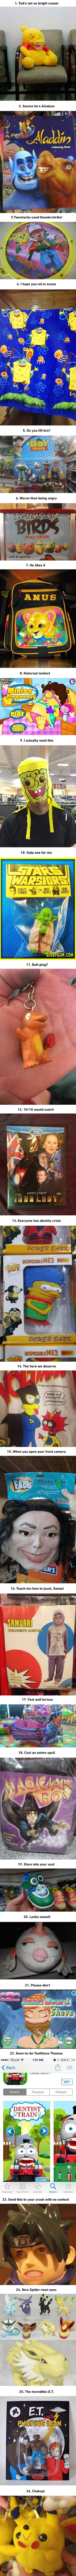 horrific-knock-off-products